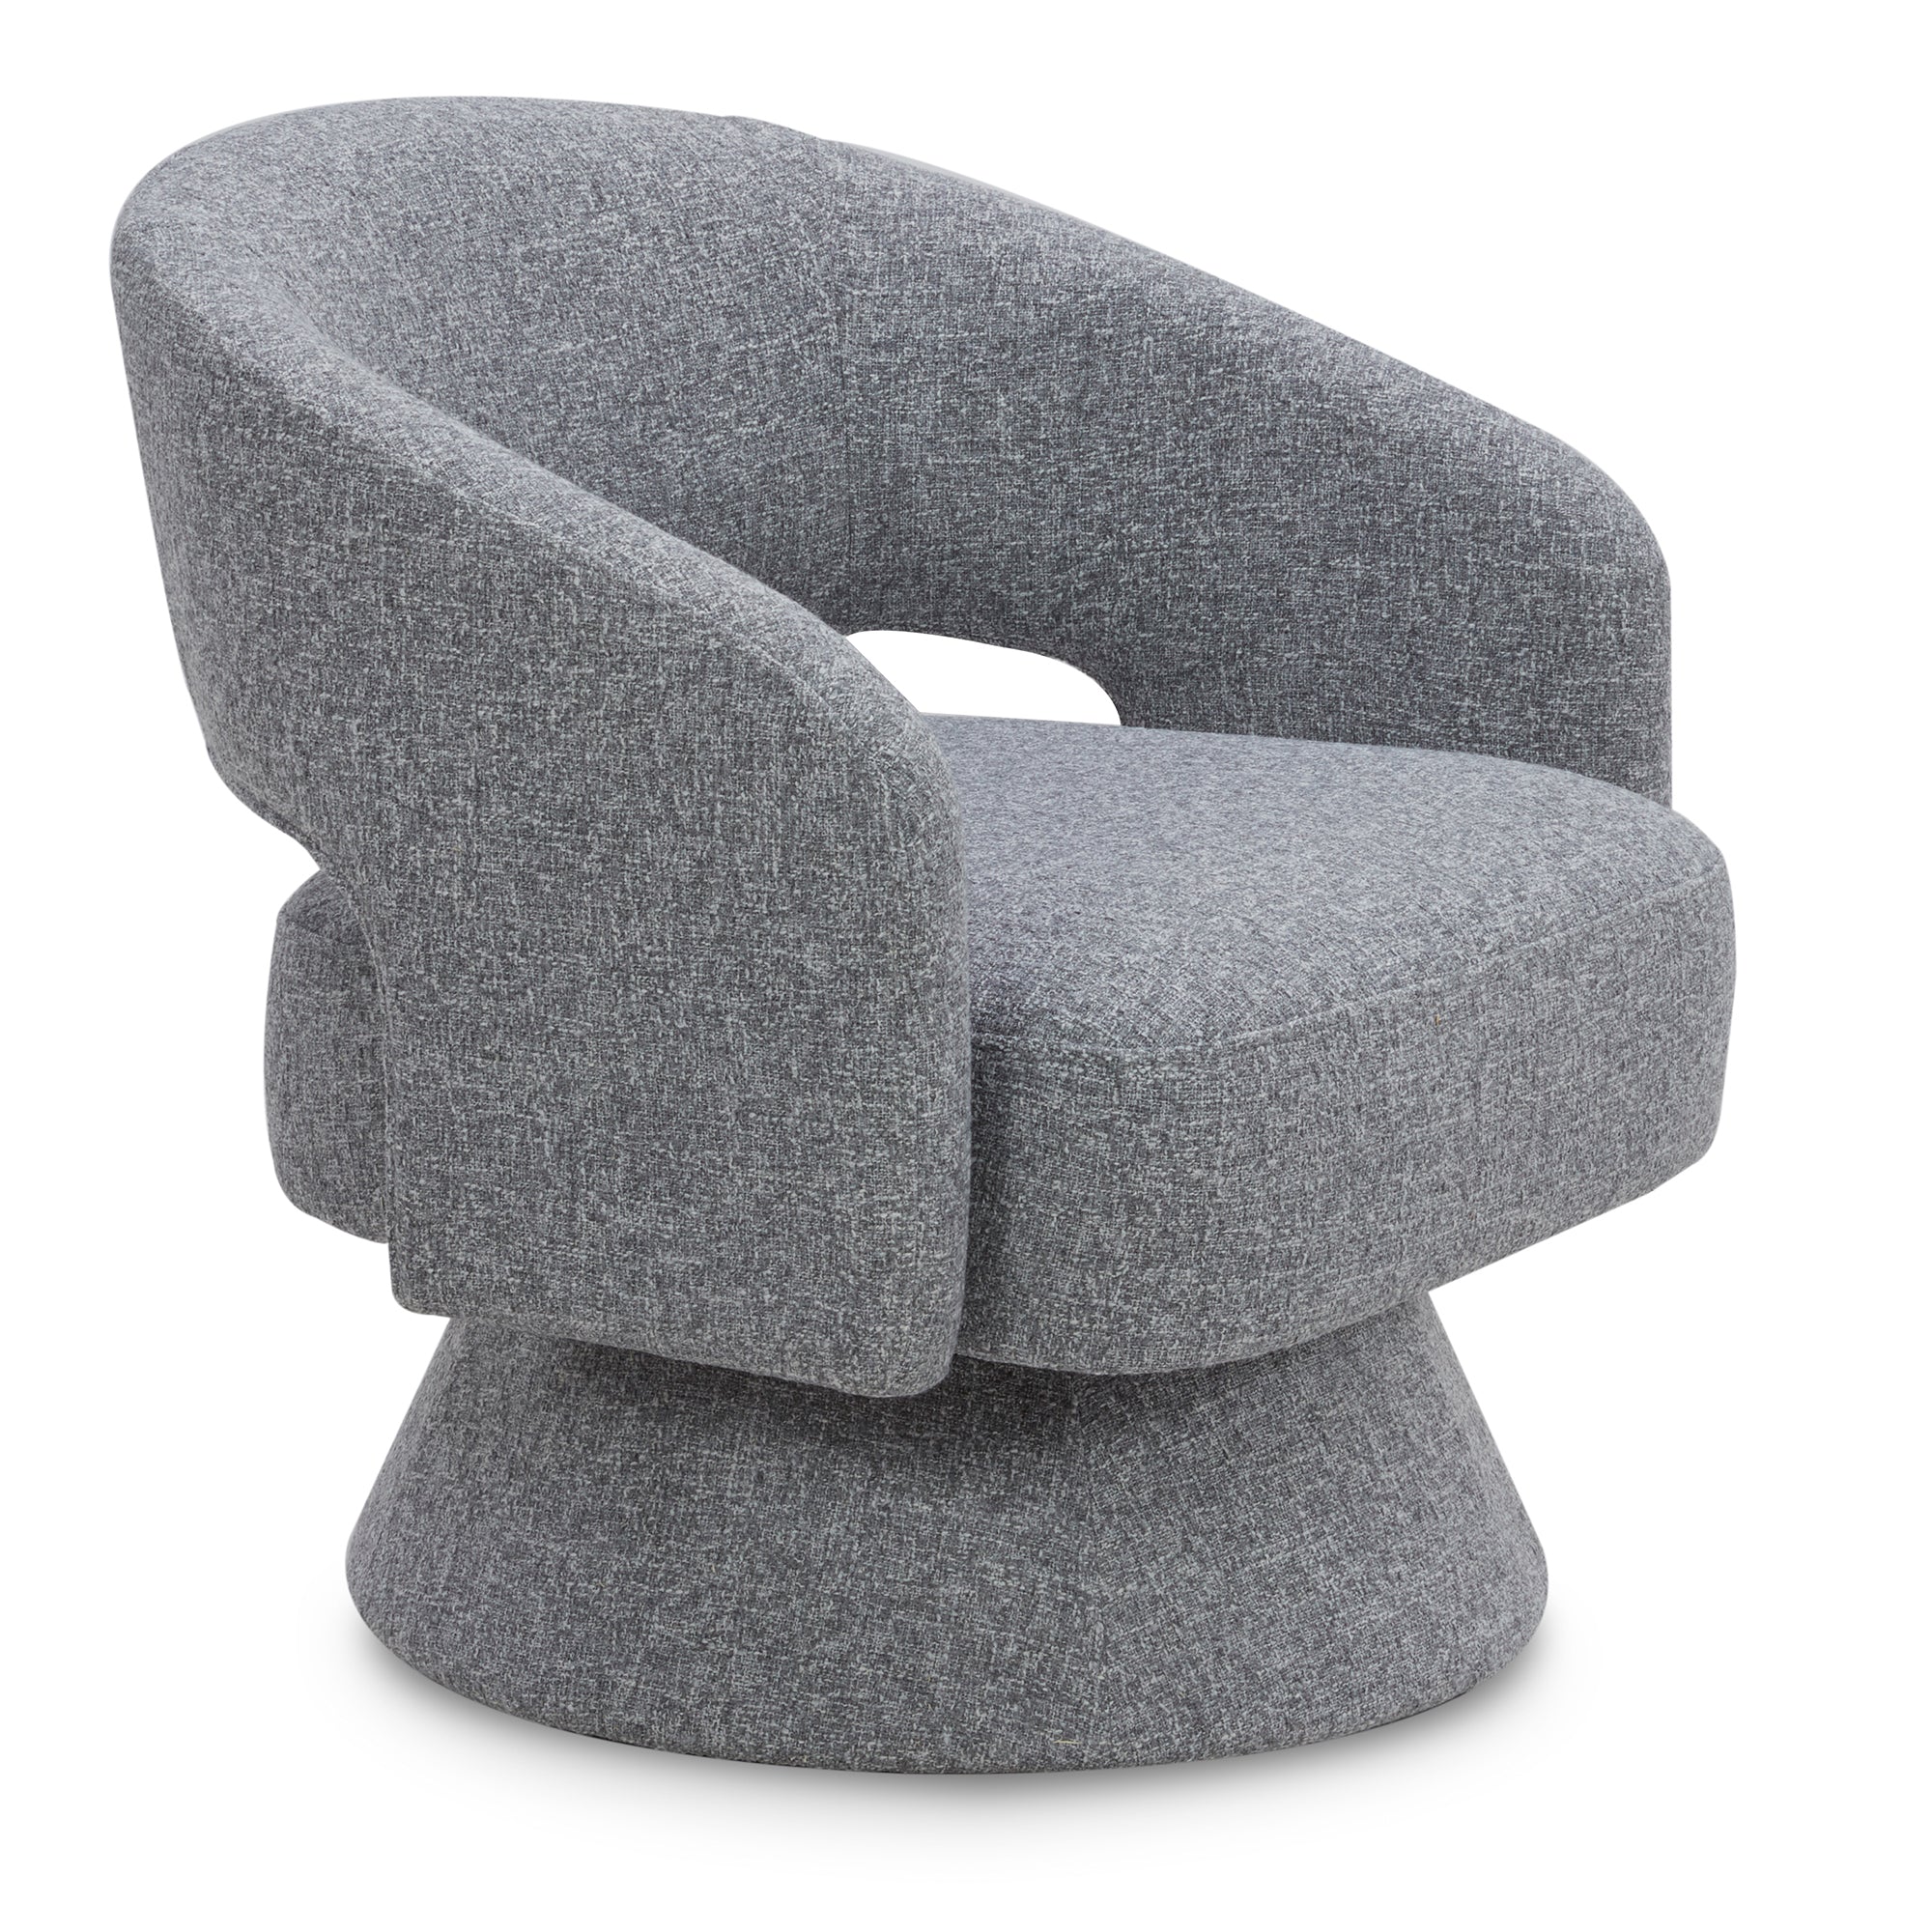 CHITA LIVING-Ambre Swivel Accent Chair-Accent Chair-Fabric-Grey (Multi-Colored)-